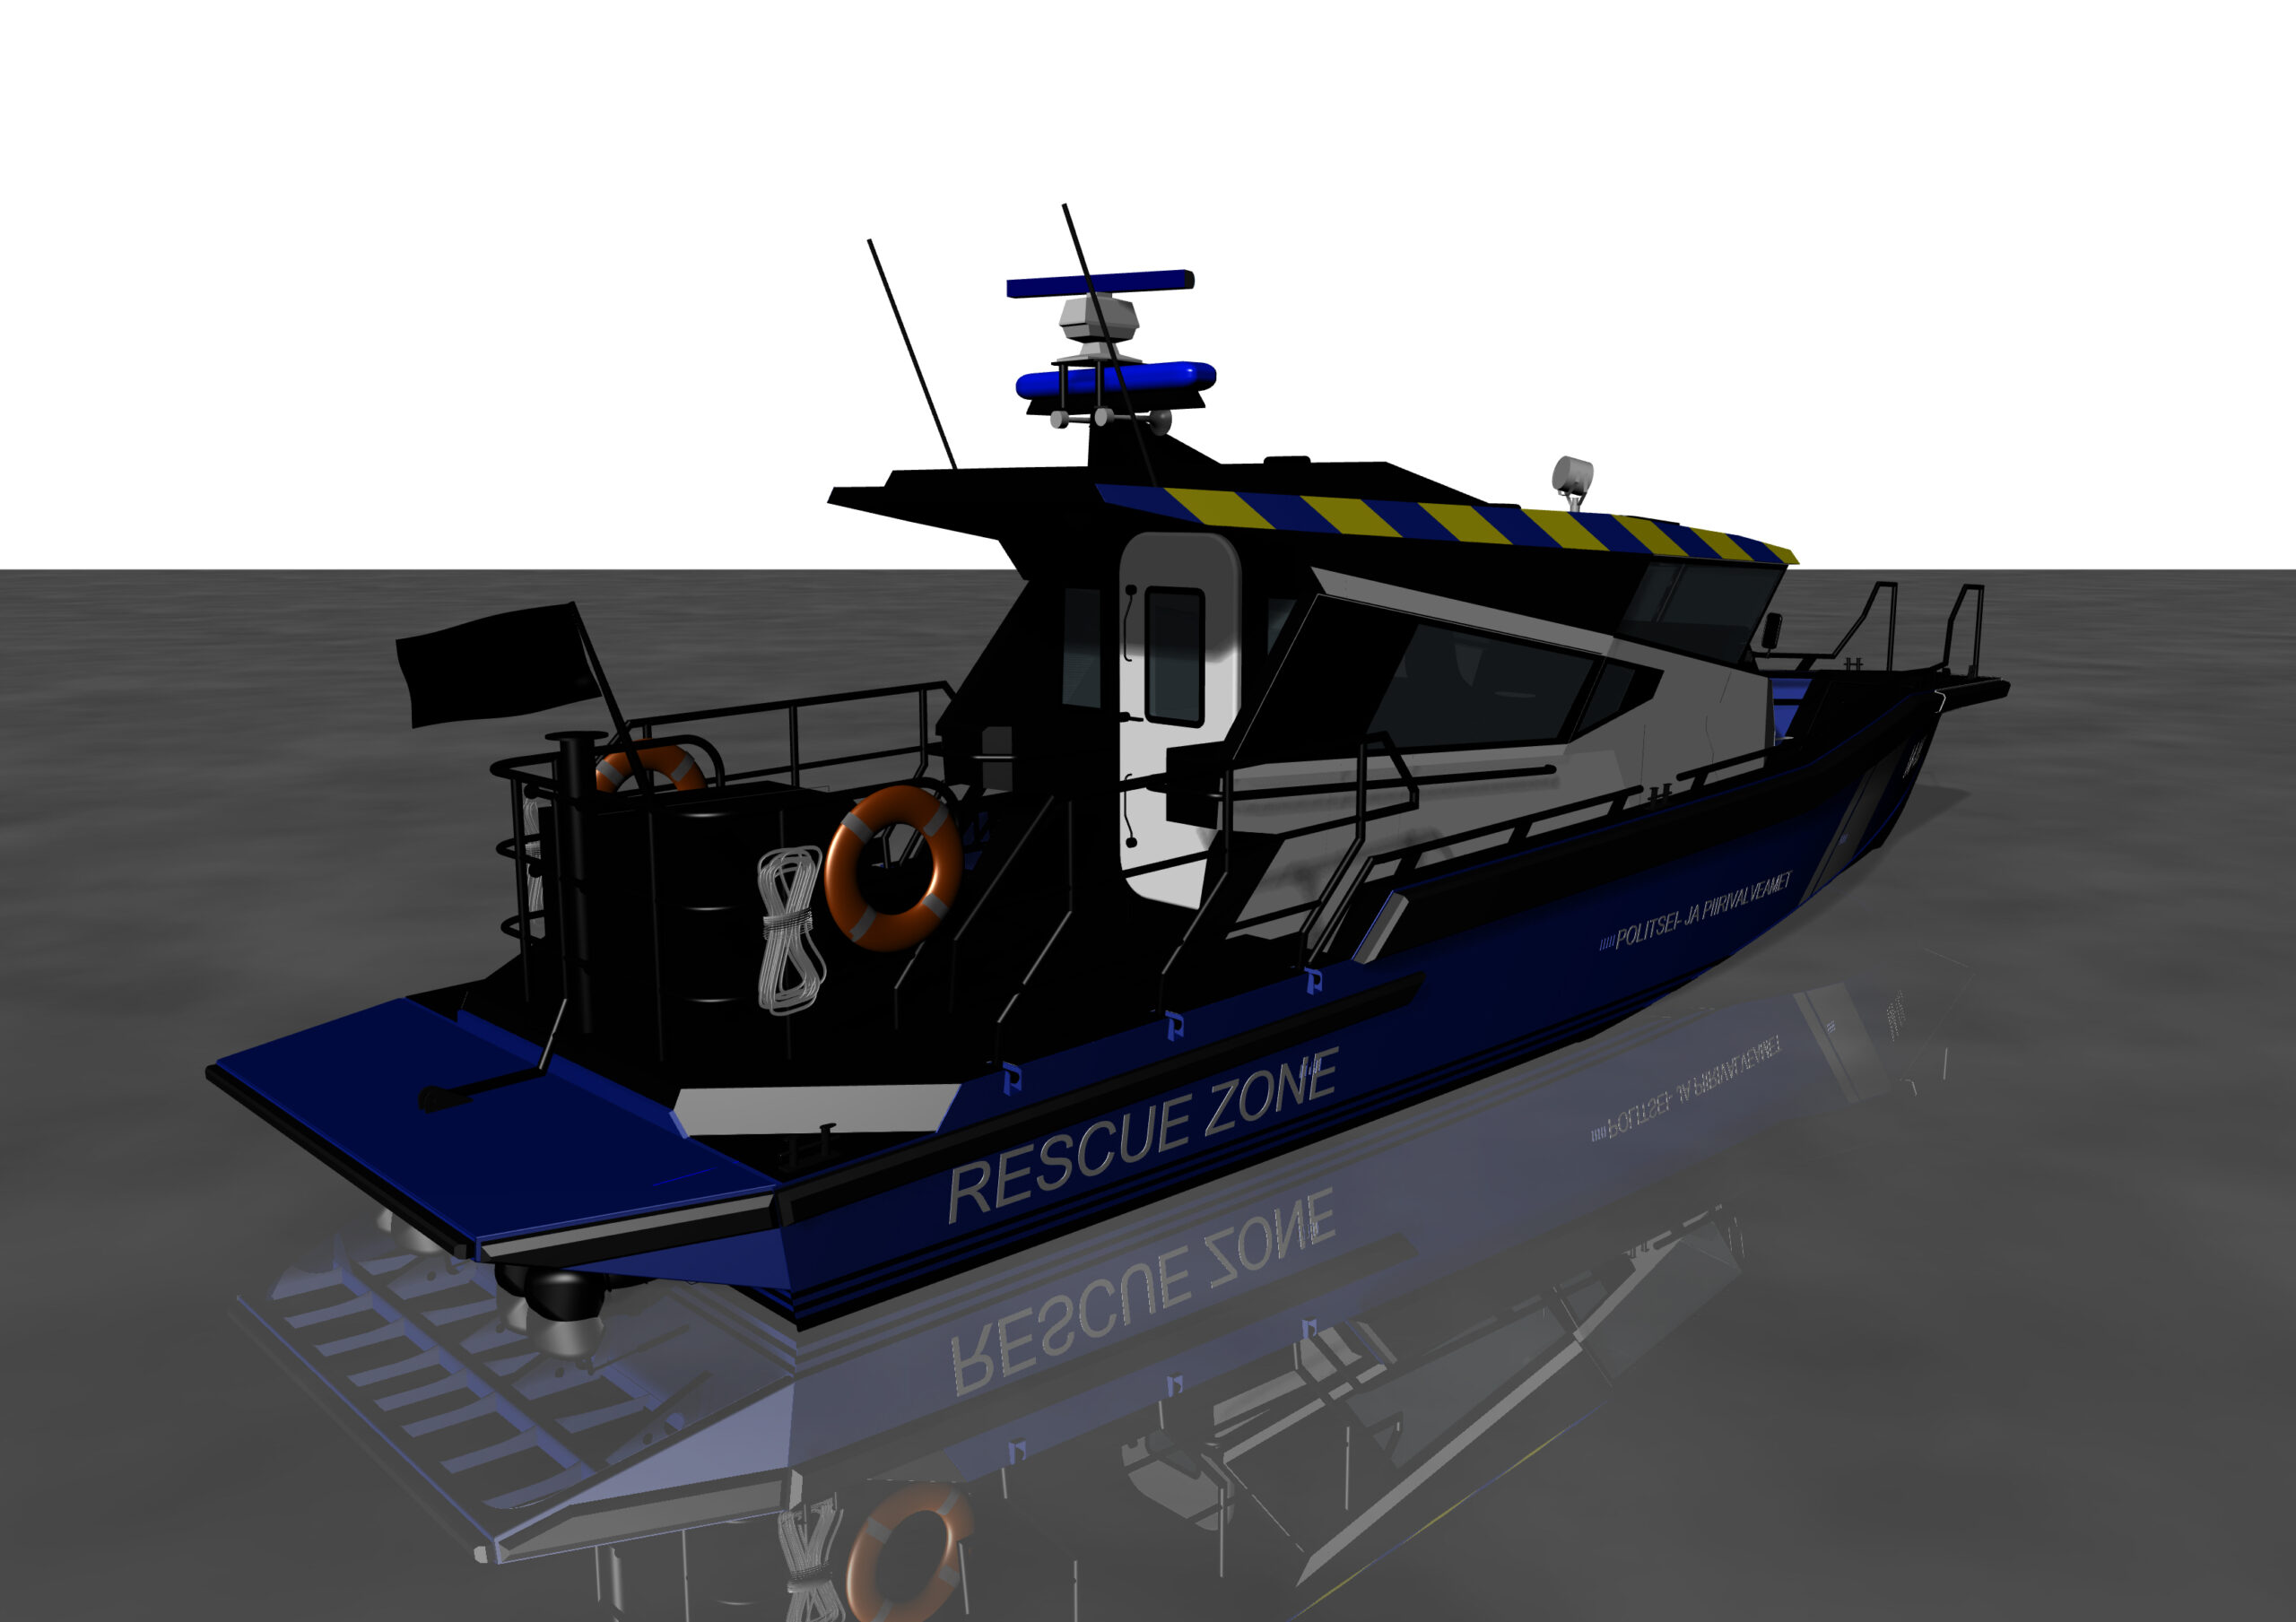 Law enforcement boat, aluminium patrol boat, aluminium sar boat for search and rescure